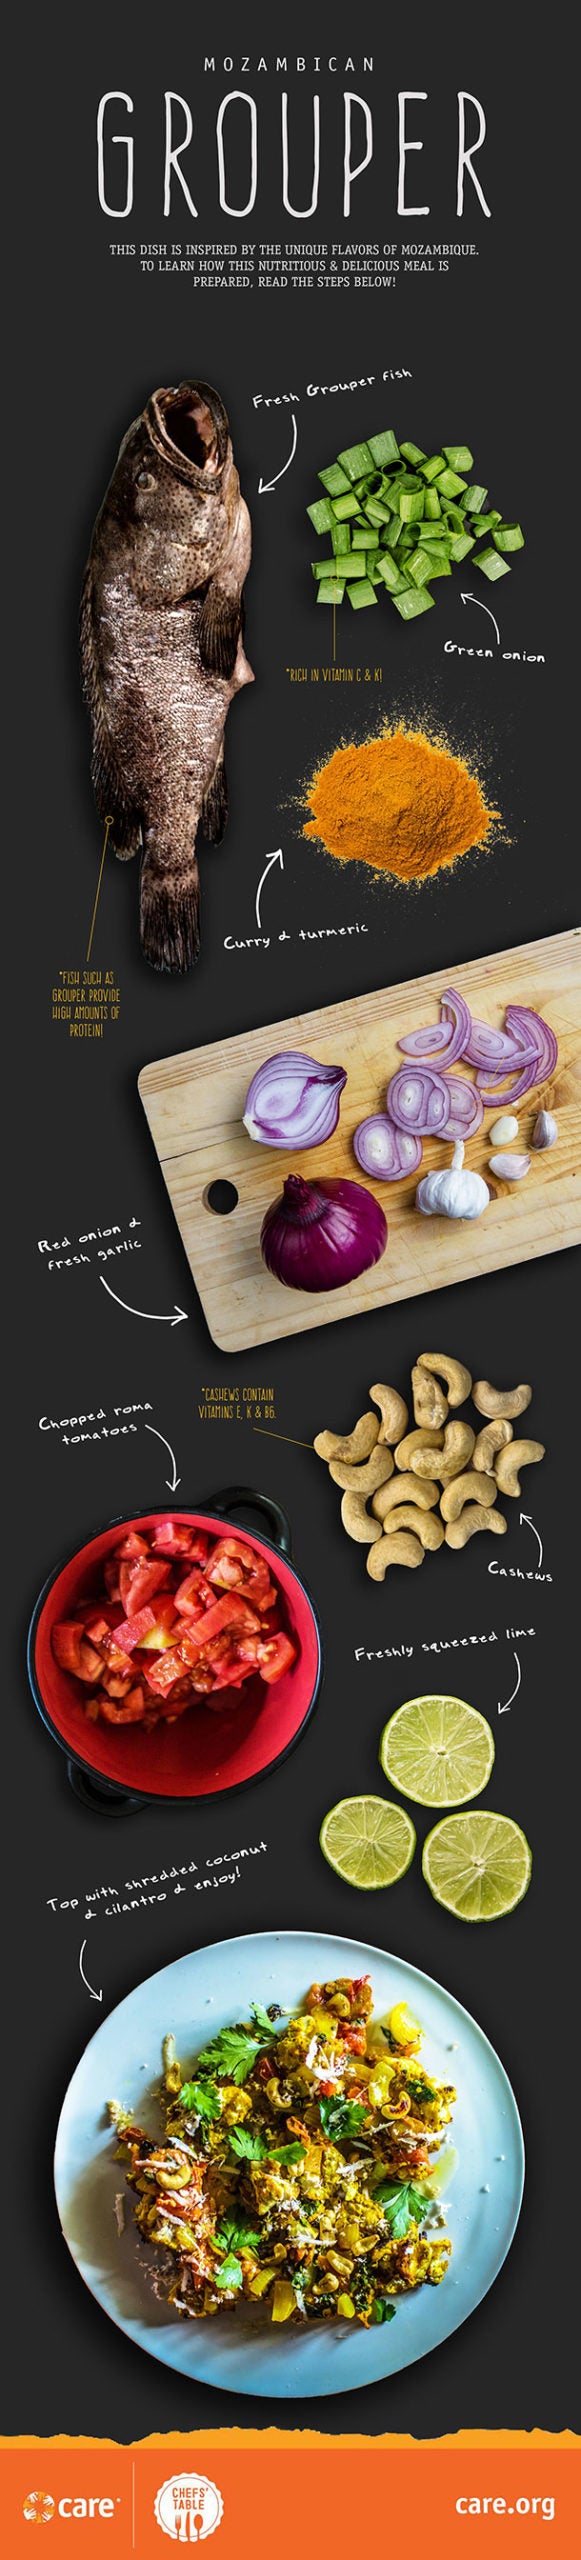 A graphic featuring ingredients and instructions to make Mozambican grouper.